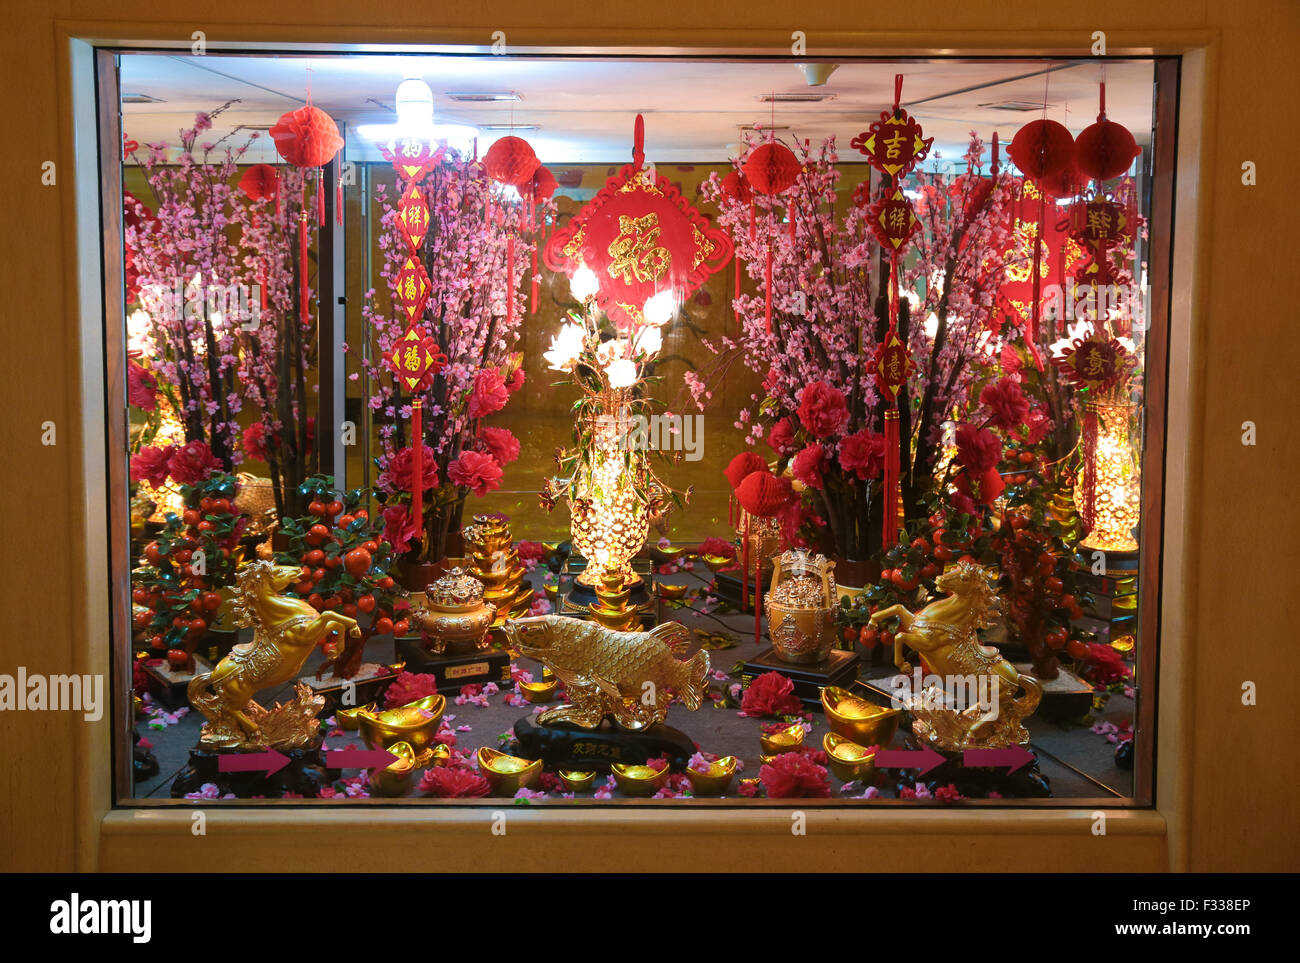 OPSM Chinese New Year Window Displays - Dashing Group